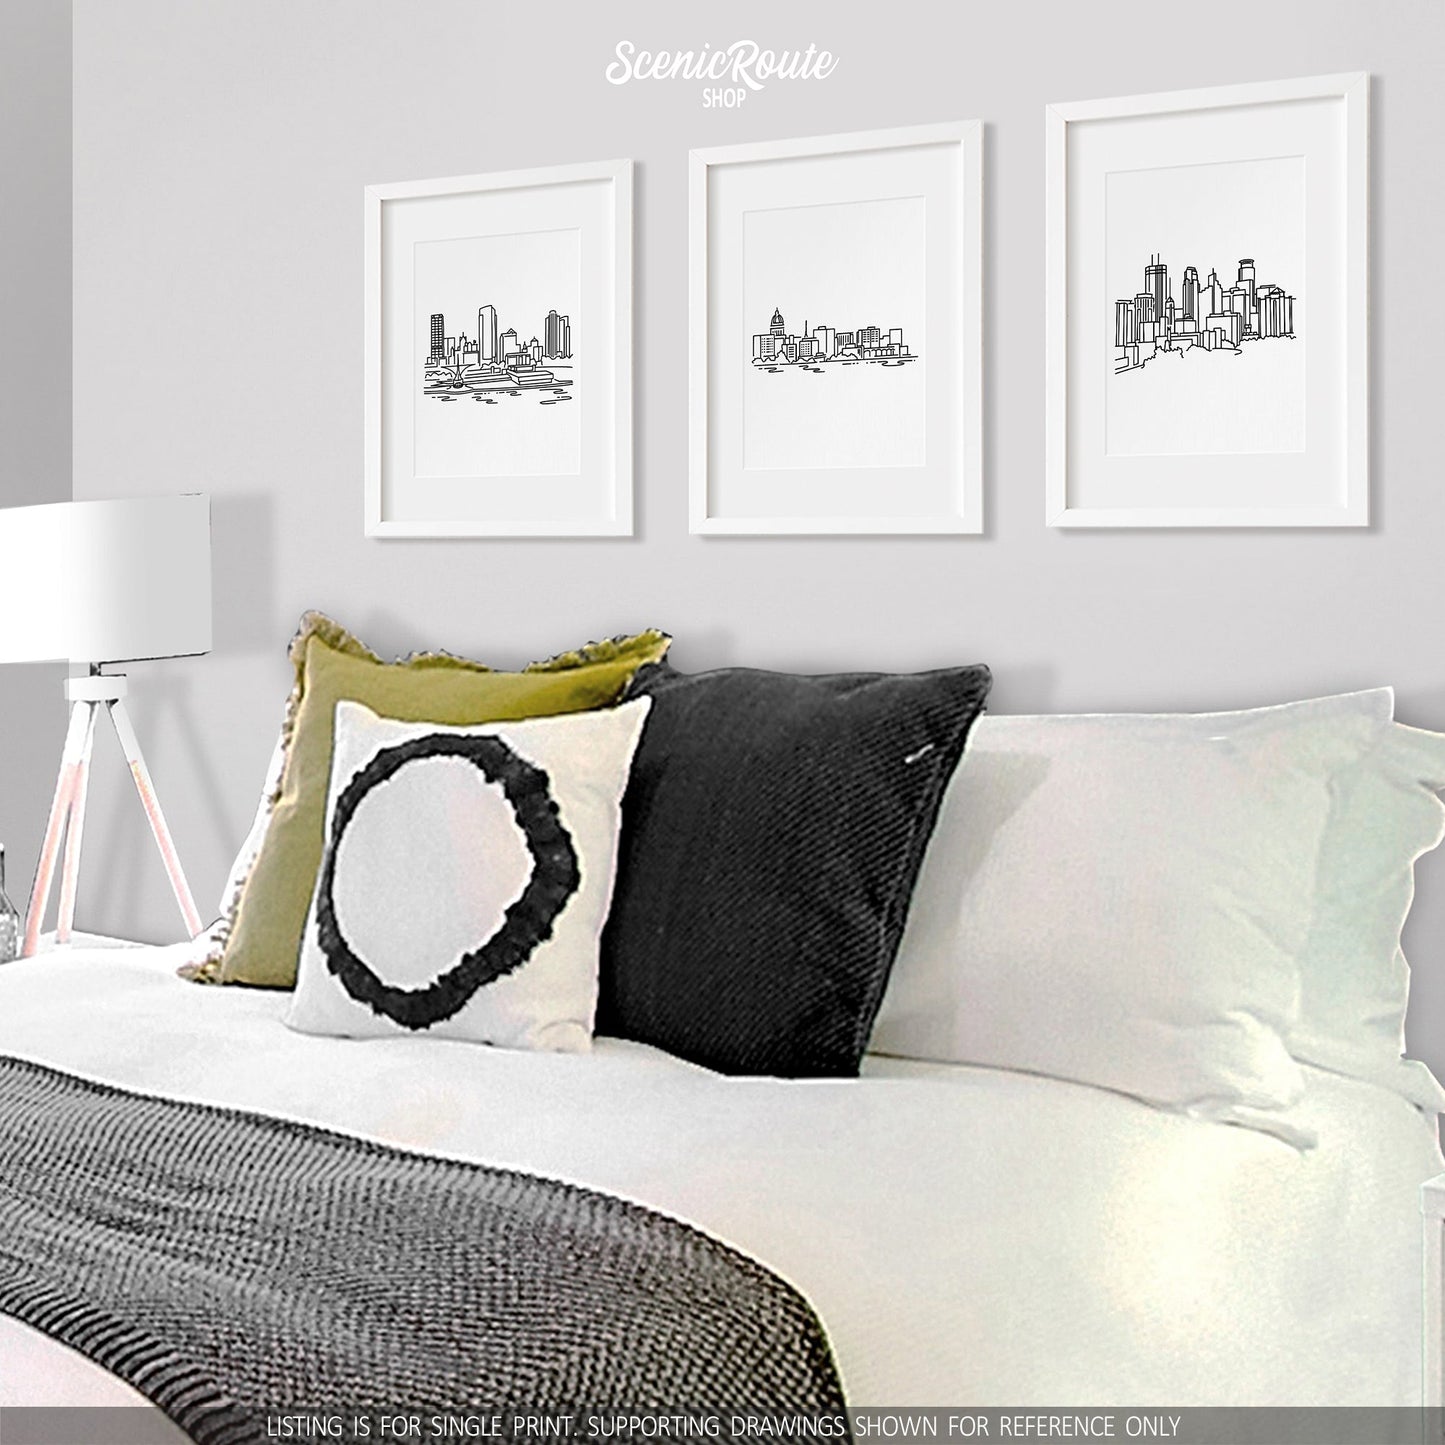 A group of three framed drawings on a white wall above a bed. The line art drawings include the Milwaukee Skyline, Madison Skyline, and Minneapolis Skyline